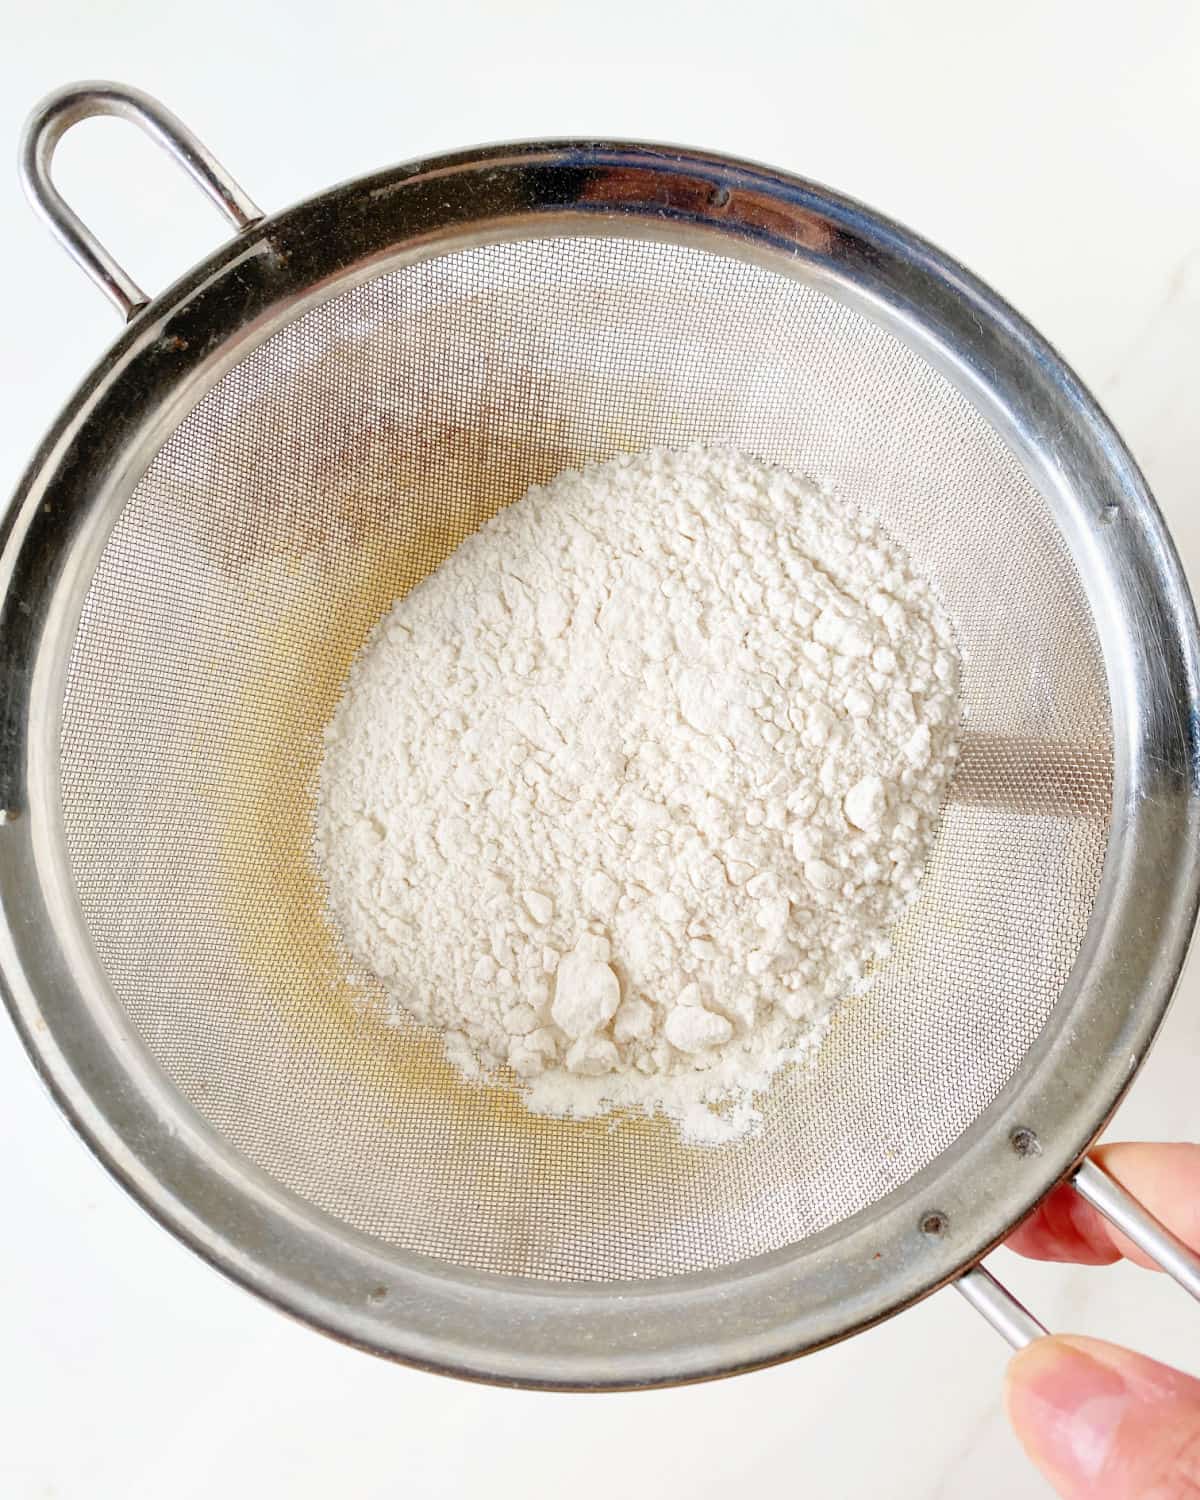 Sifting flour over cake batter with a metal mesh sifter.